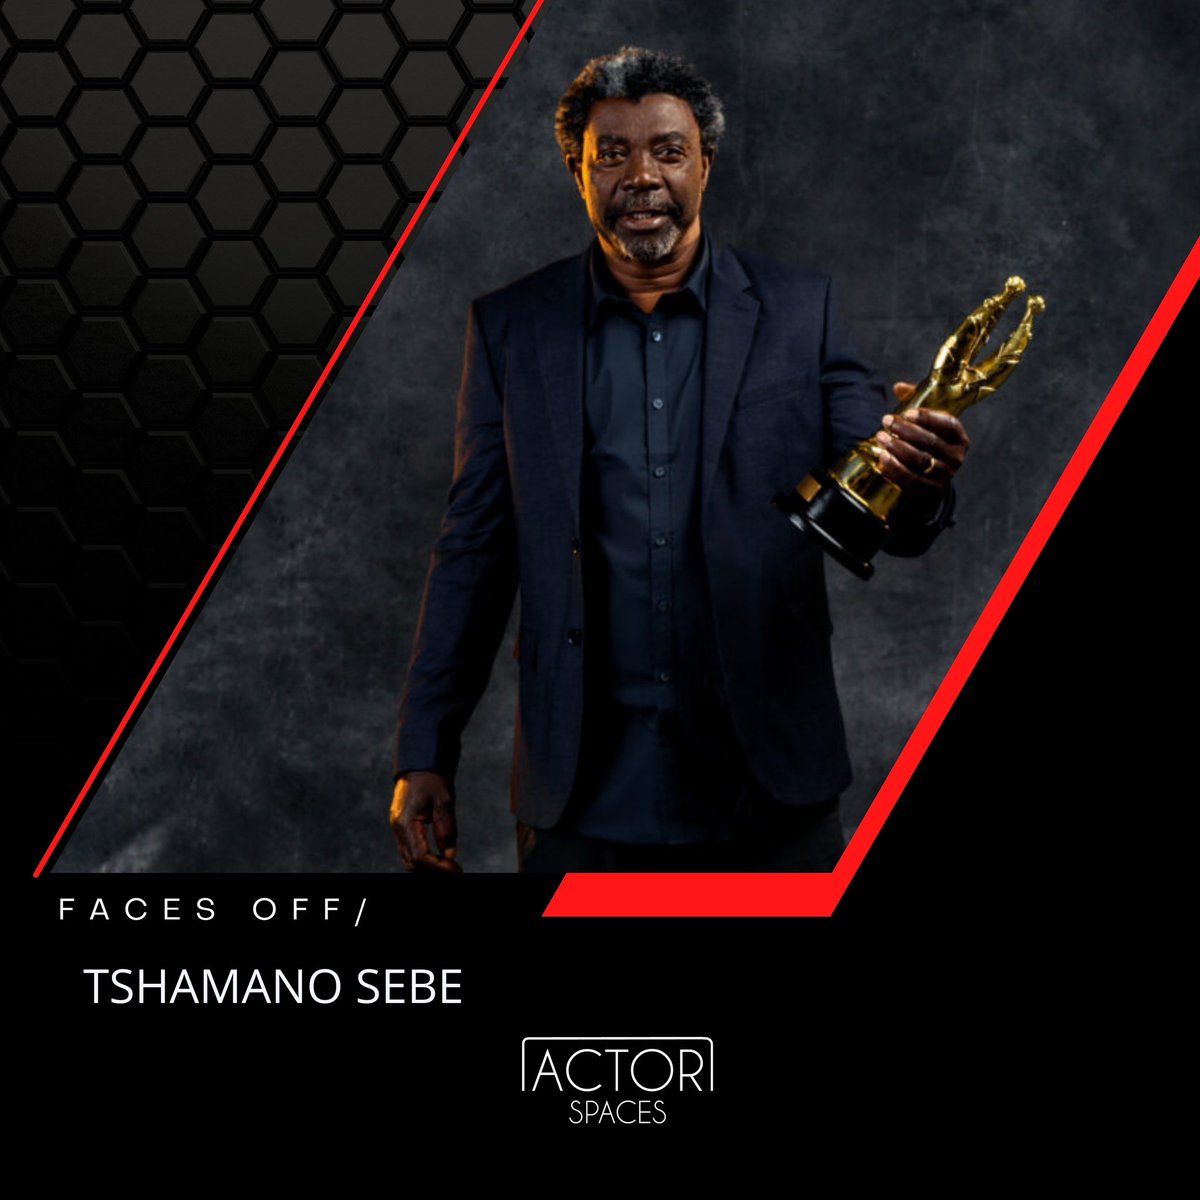 FACES OFF// TSHAMANO SEBE 

Tshamano Sebe is an award winning South African actor best known for his role as ‘baaidjievanger’ Biza in the SABC2 sitcom Stokvel, from 2003-2012.

Here are a few faces off : Tshamano Sebe (THREAD)